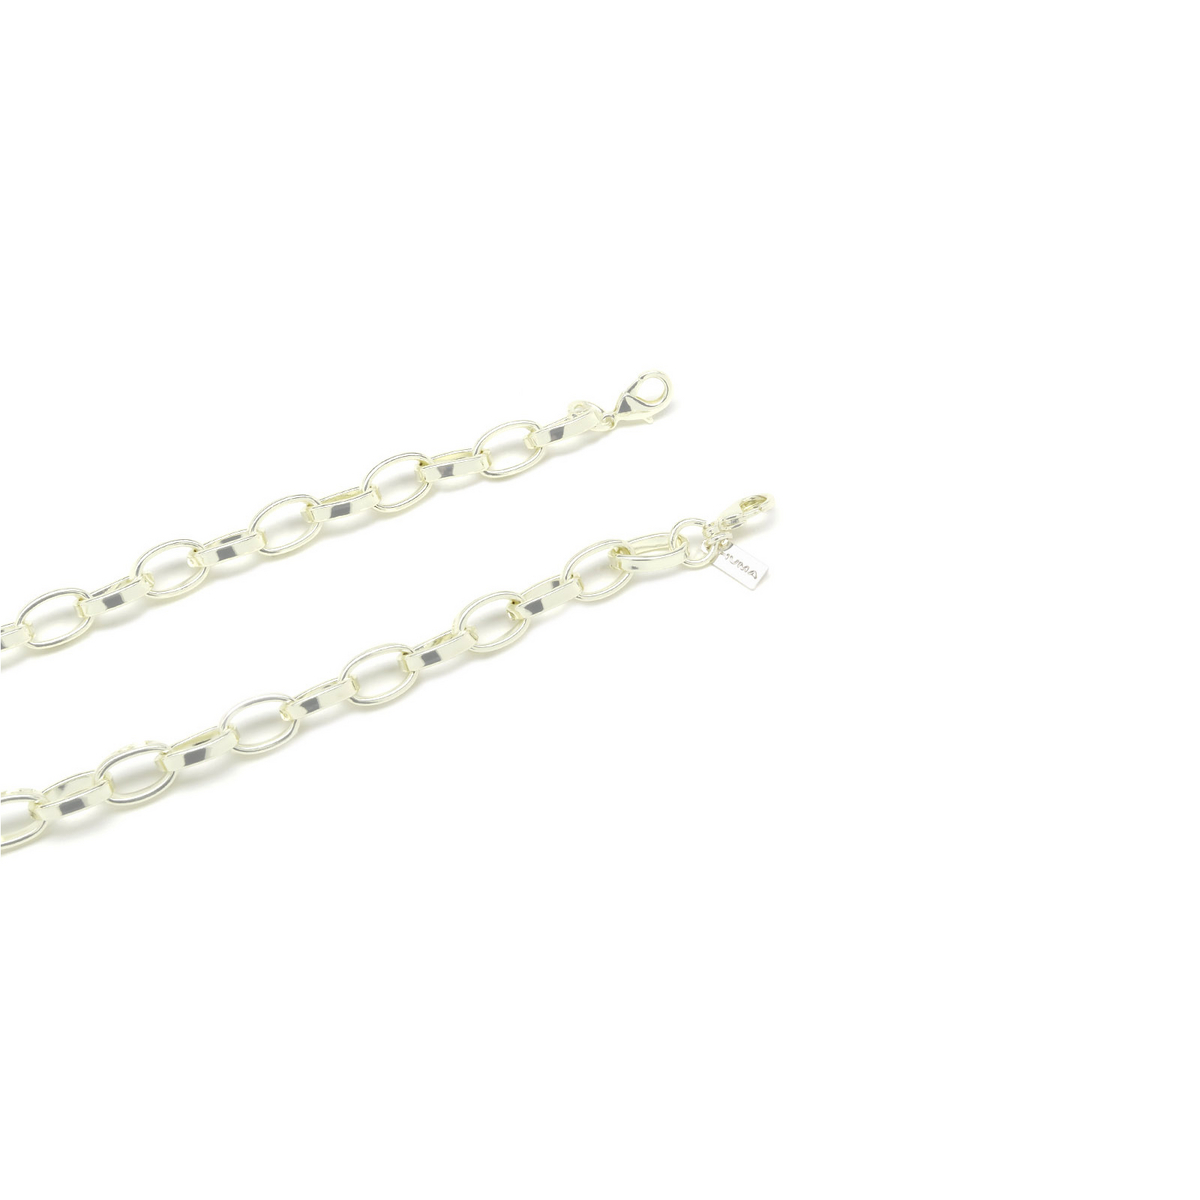 Huma® Accessories: Oval Chain color Silver P18 - front view.